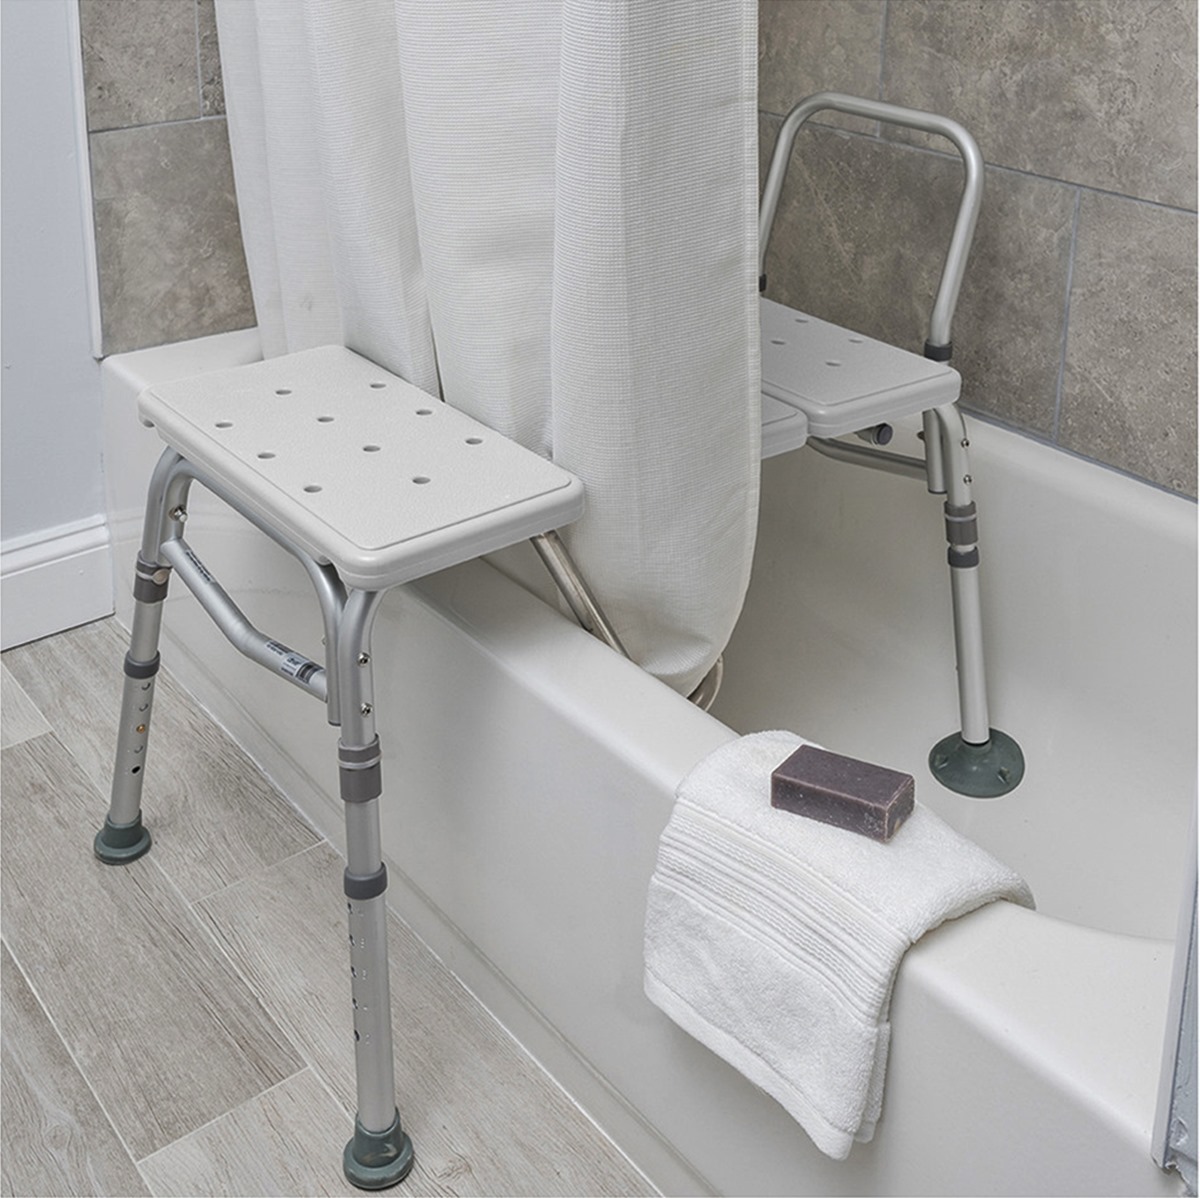 How To Use A Tub Transfer Bench With Shower Curtain